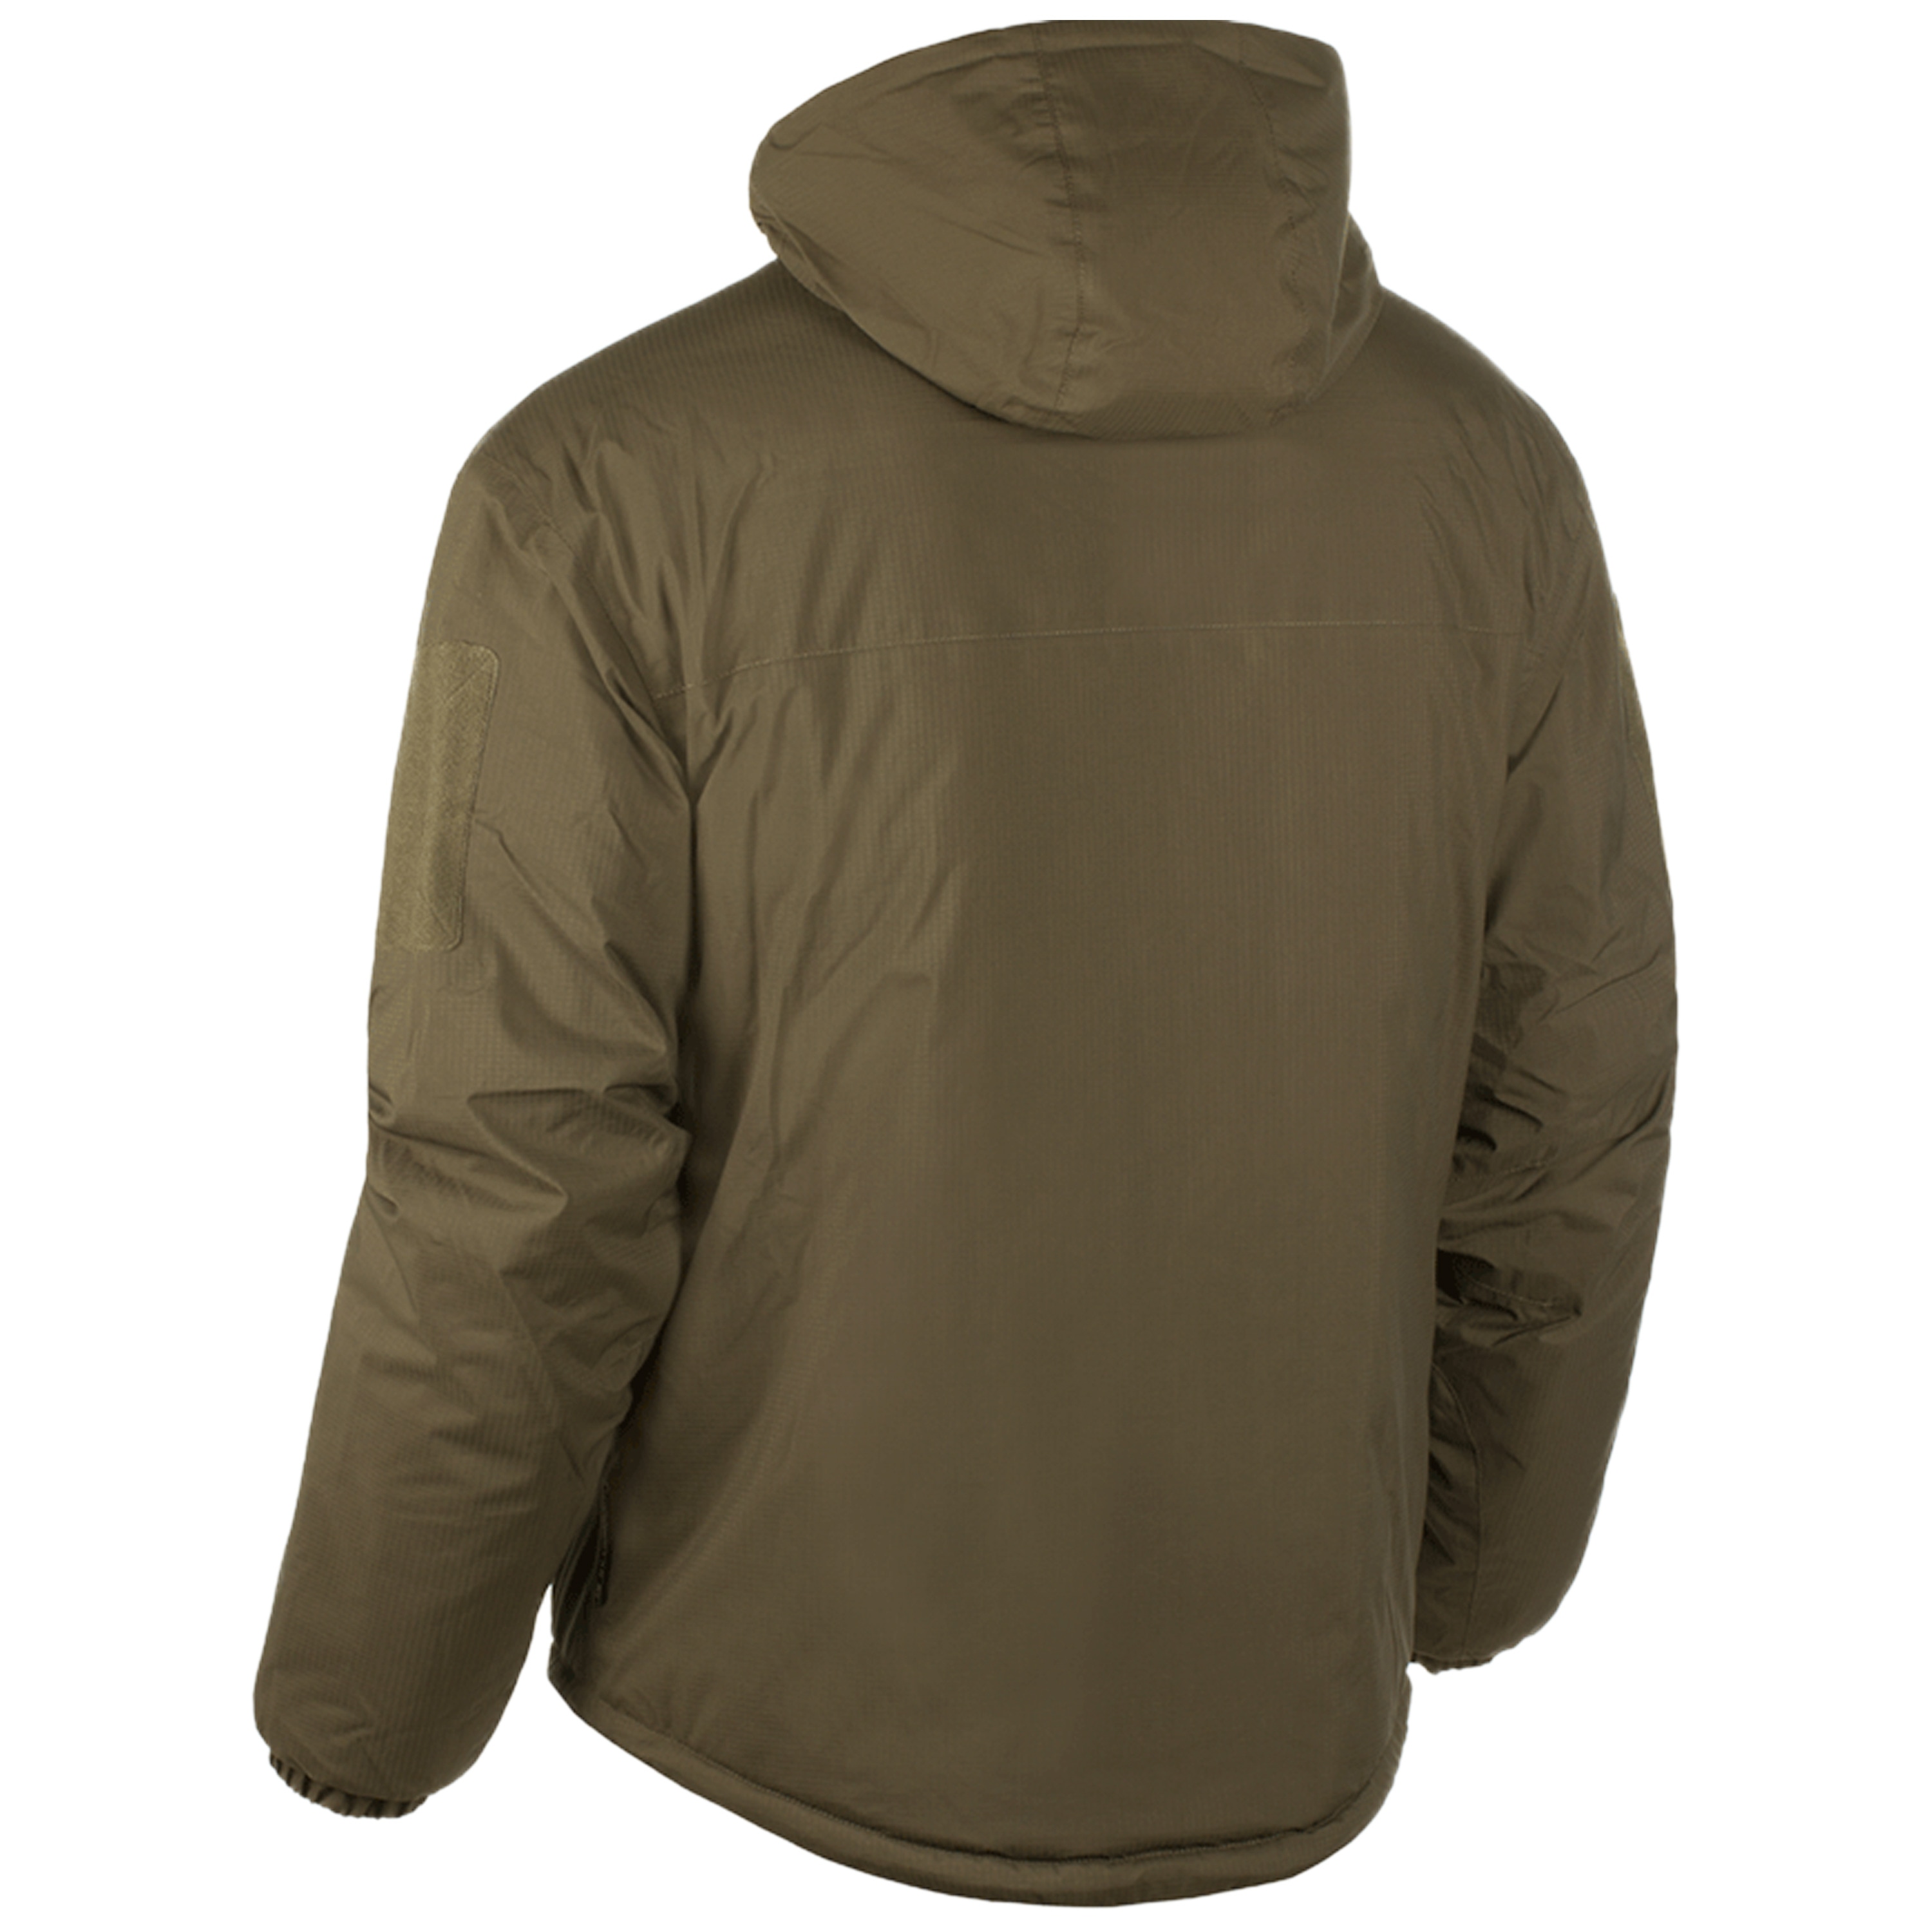 Purchase the Clawgear Jacket CIM stone gray/olive by ASMC